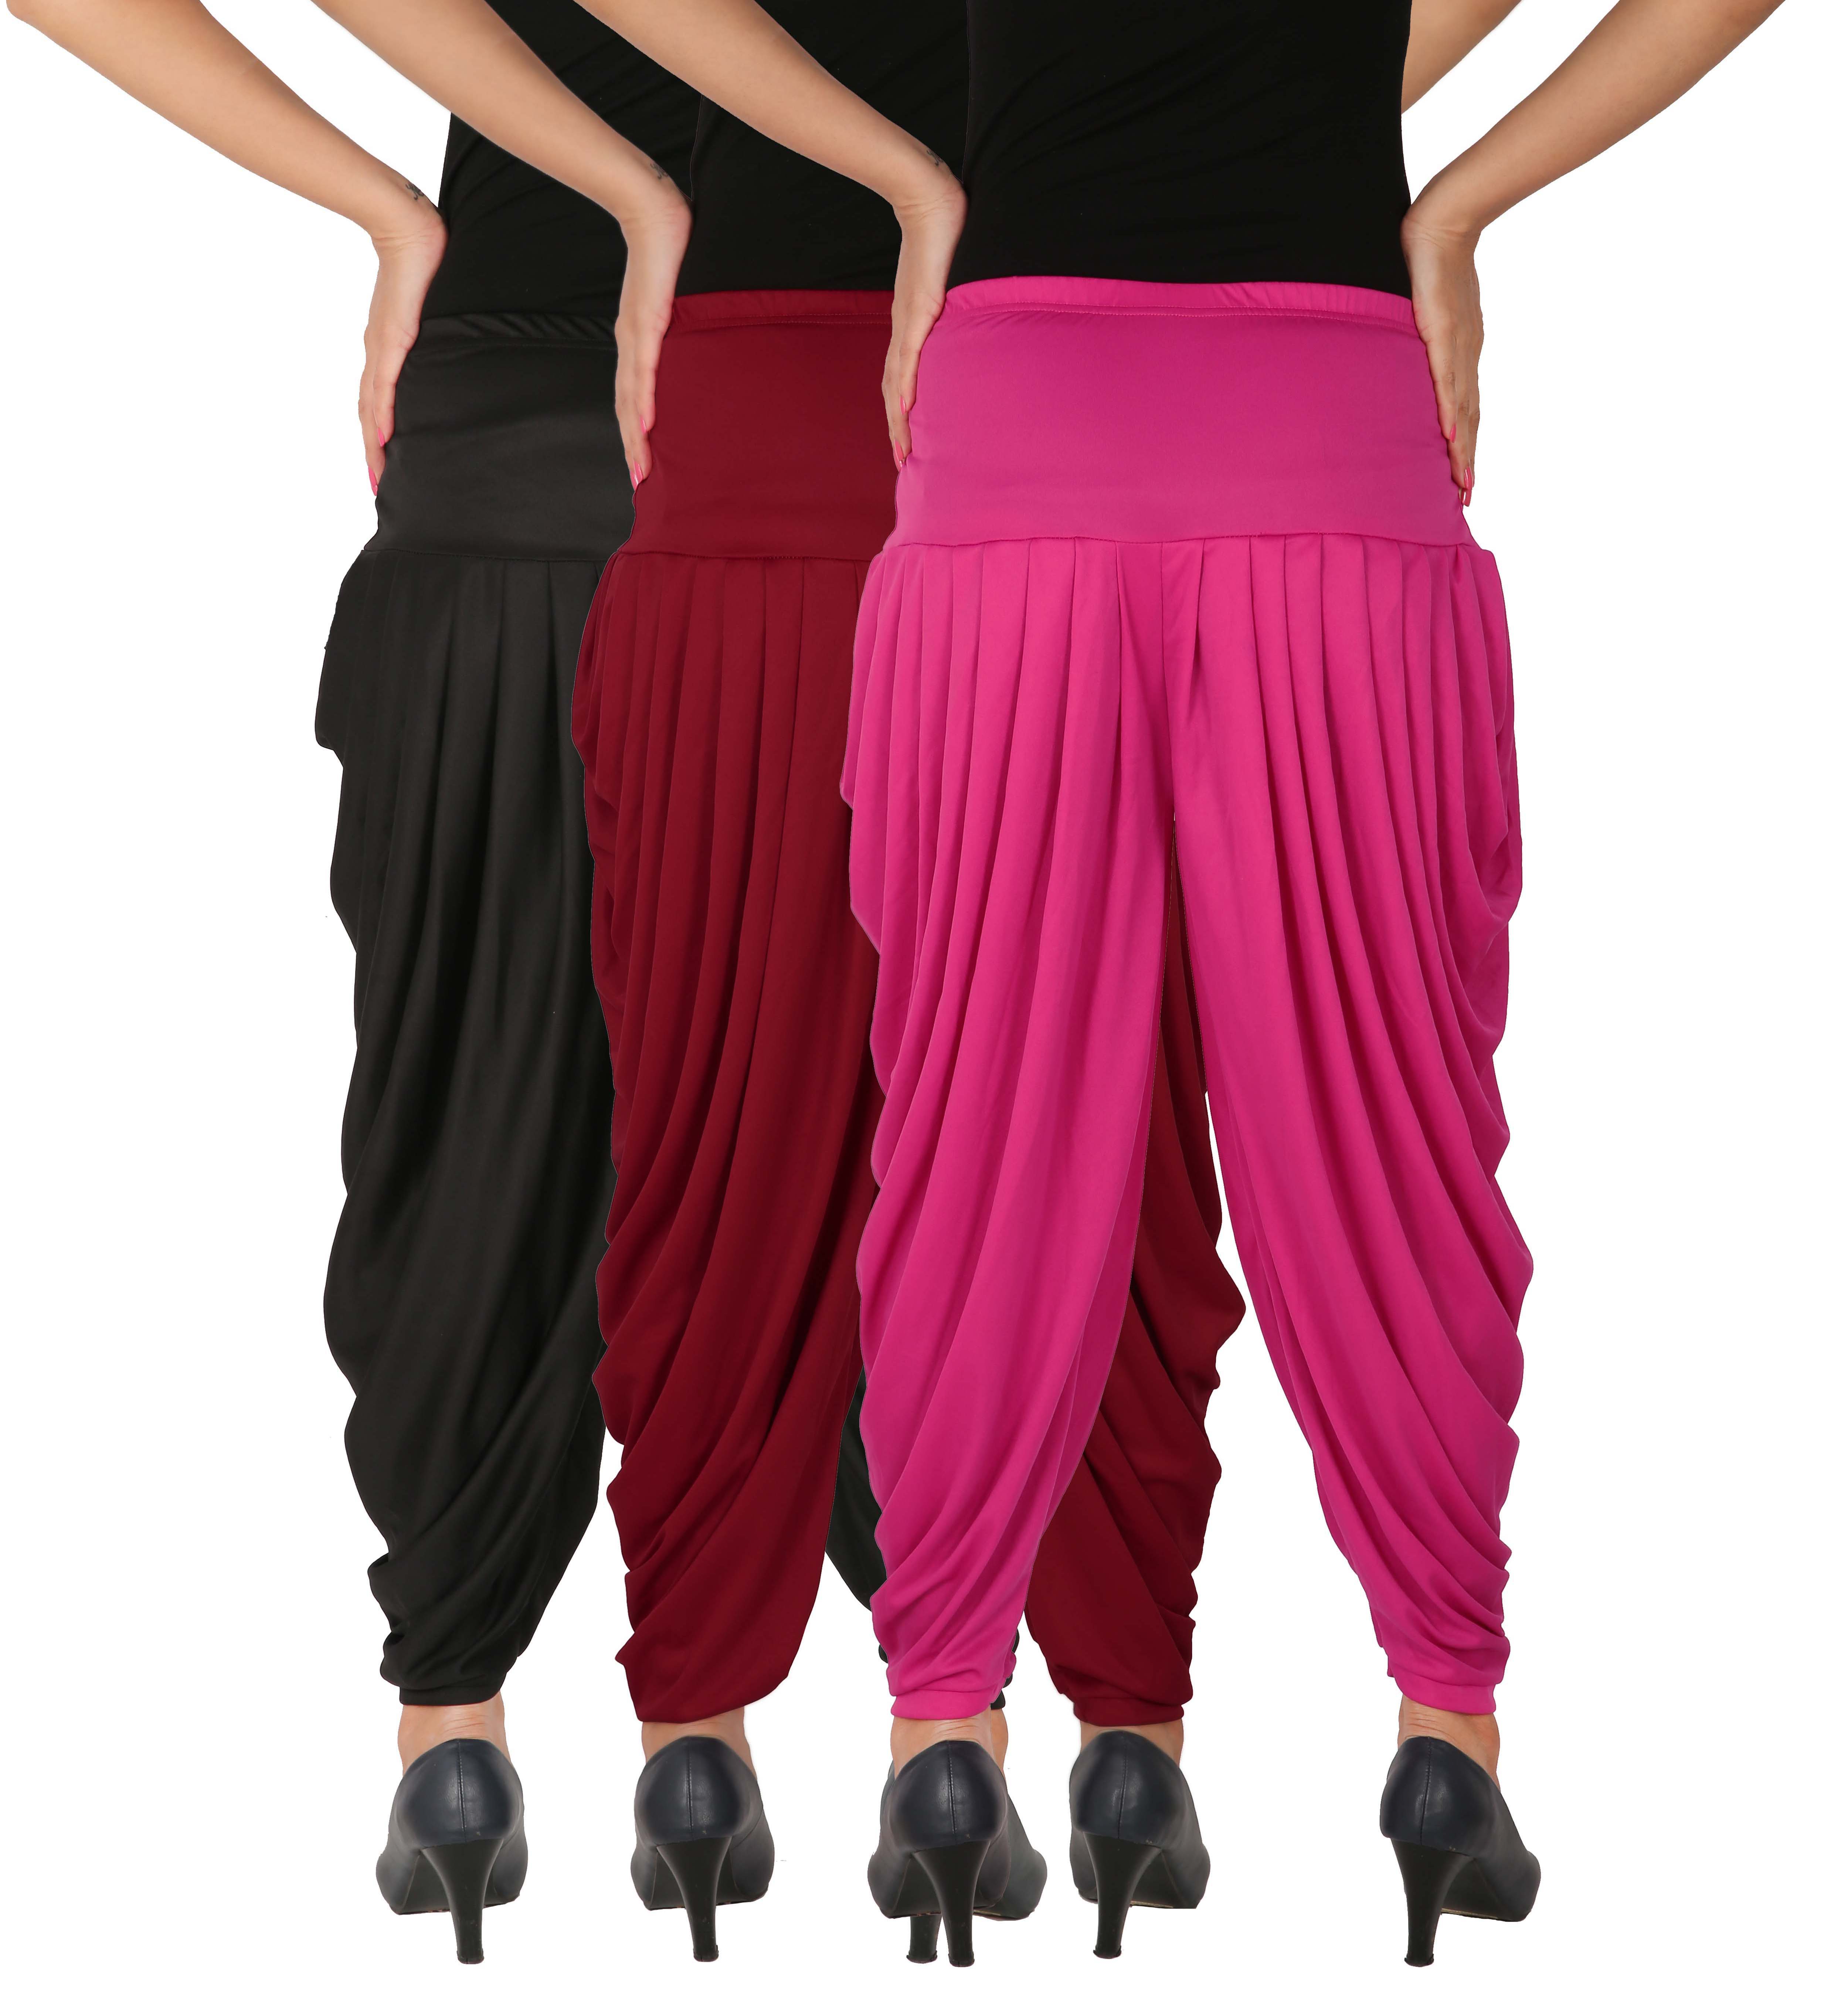 Buy Dhoti Pants Women - Culture the Dignity Women's Lycra Side Plated ...